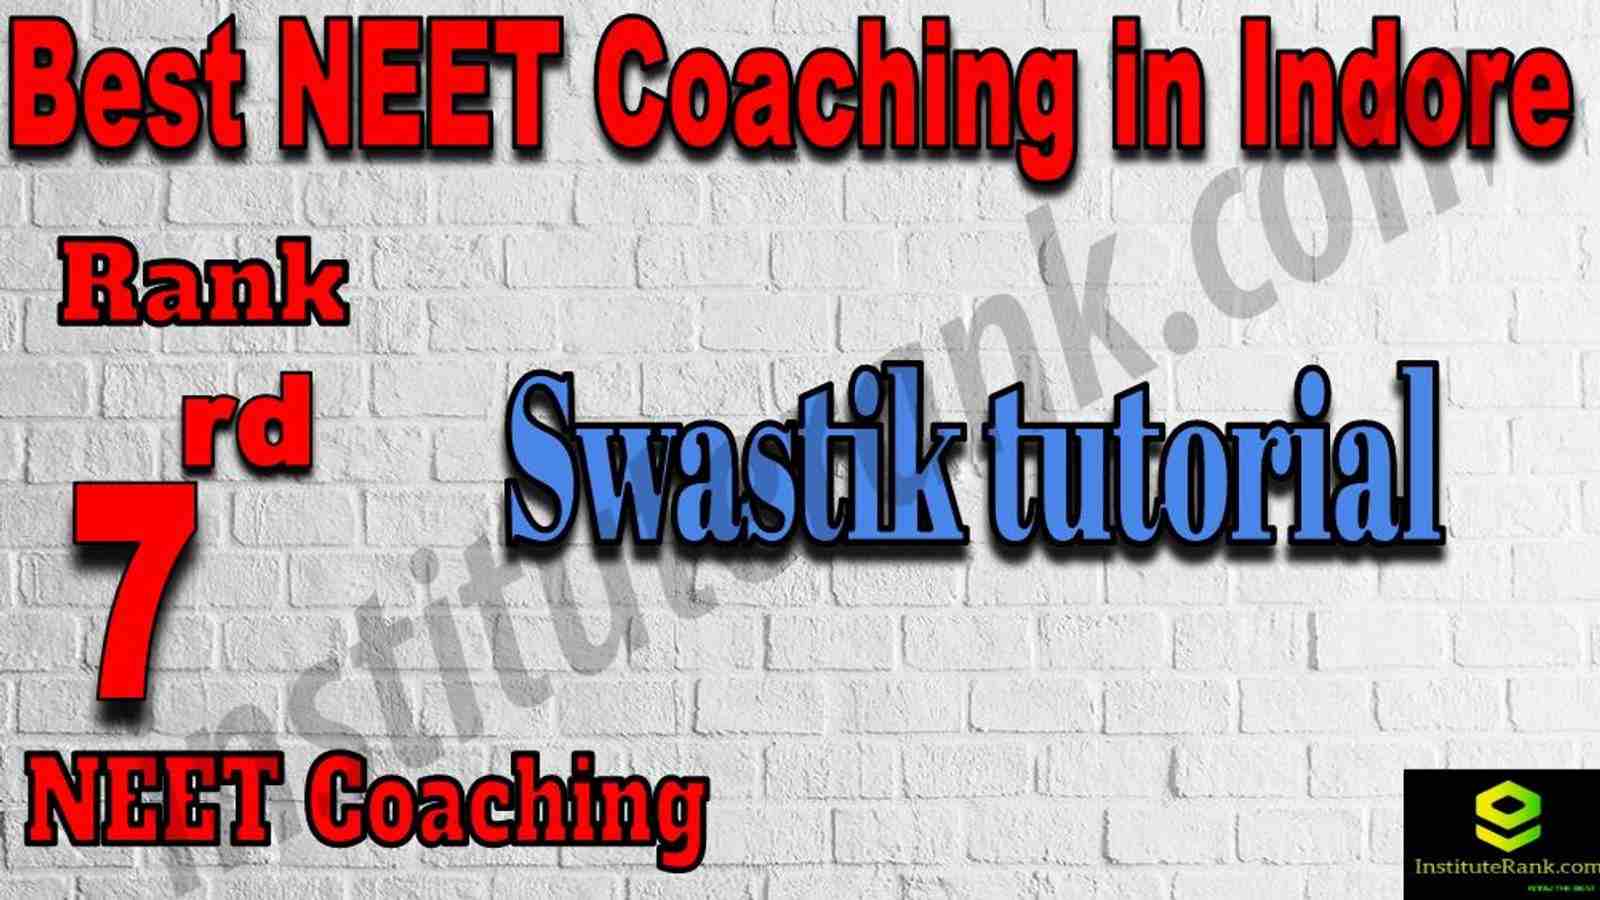 7th Best Neet Coaching in Indore